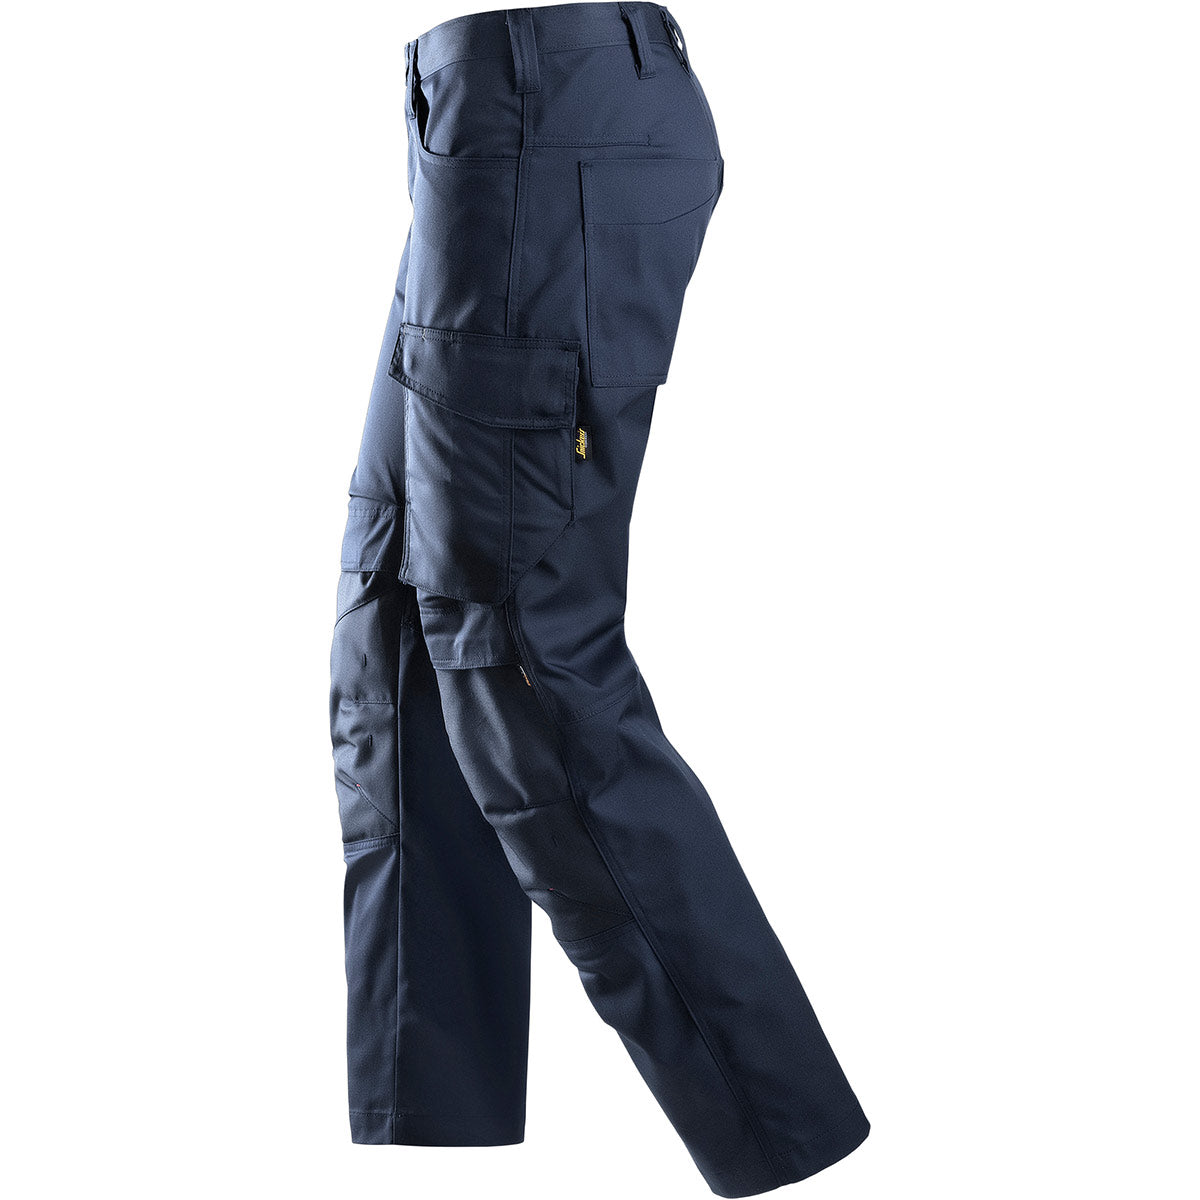 Snickers 6801 Service Trousers with Kneepad Pockets